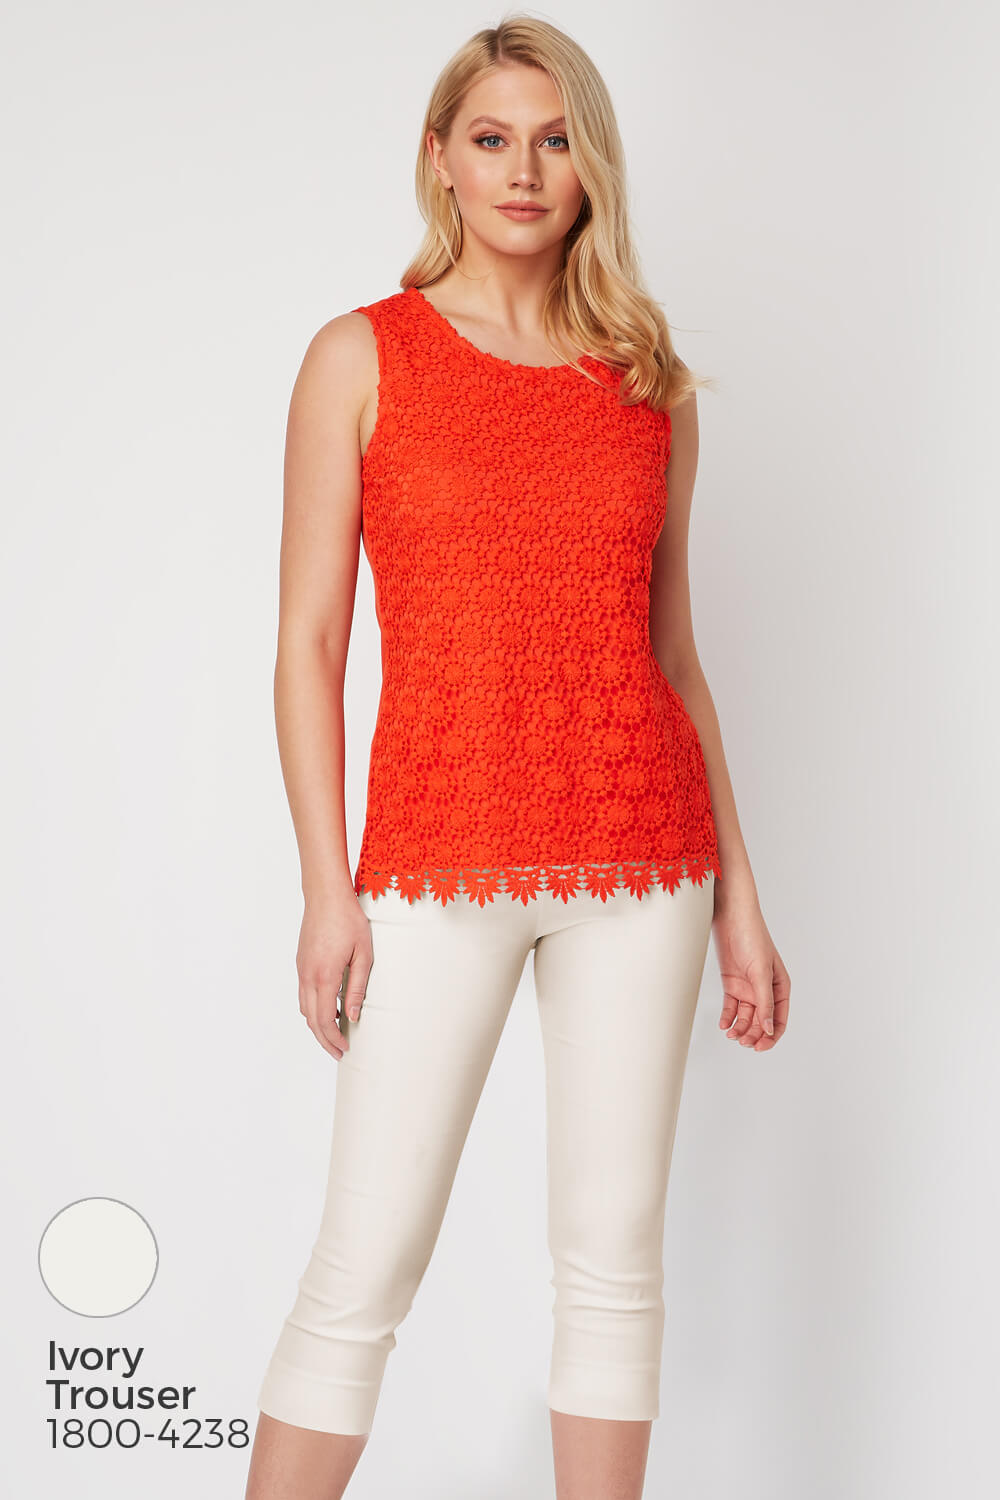 ORANGE Lace Jersey Top, Image 7 of 9